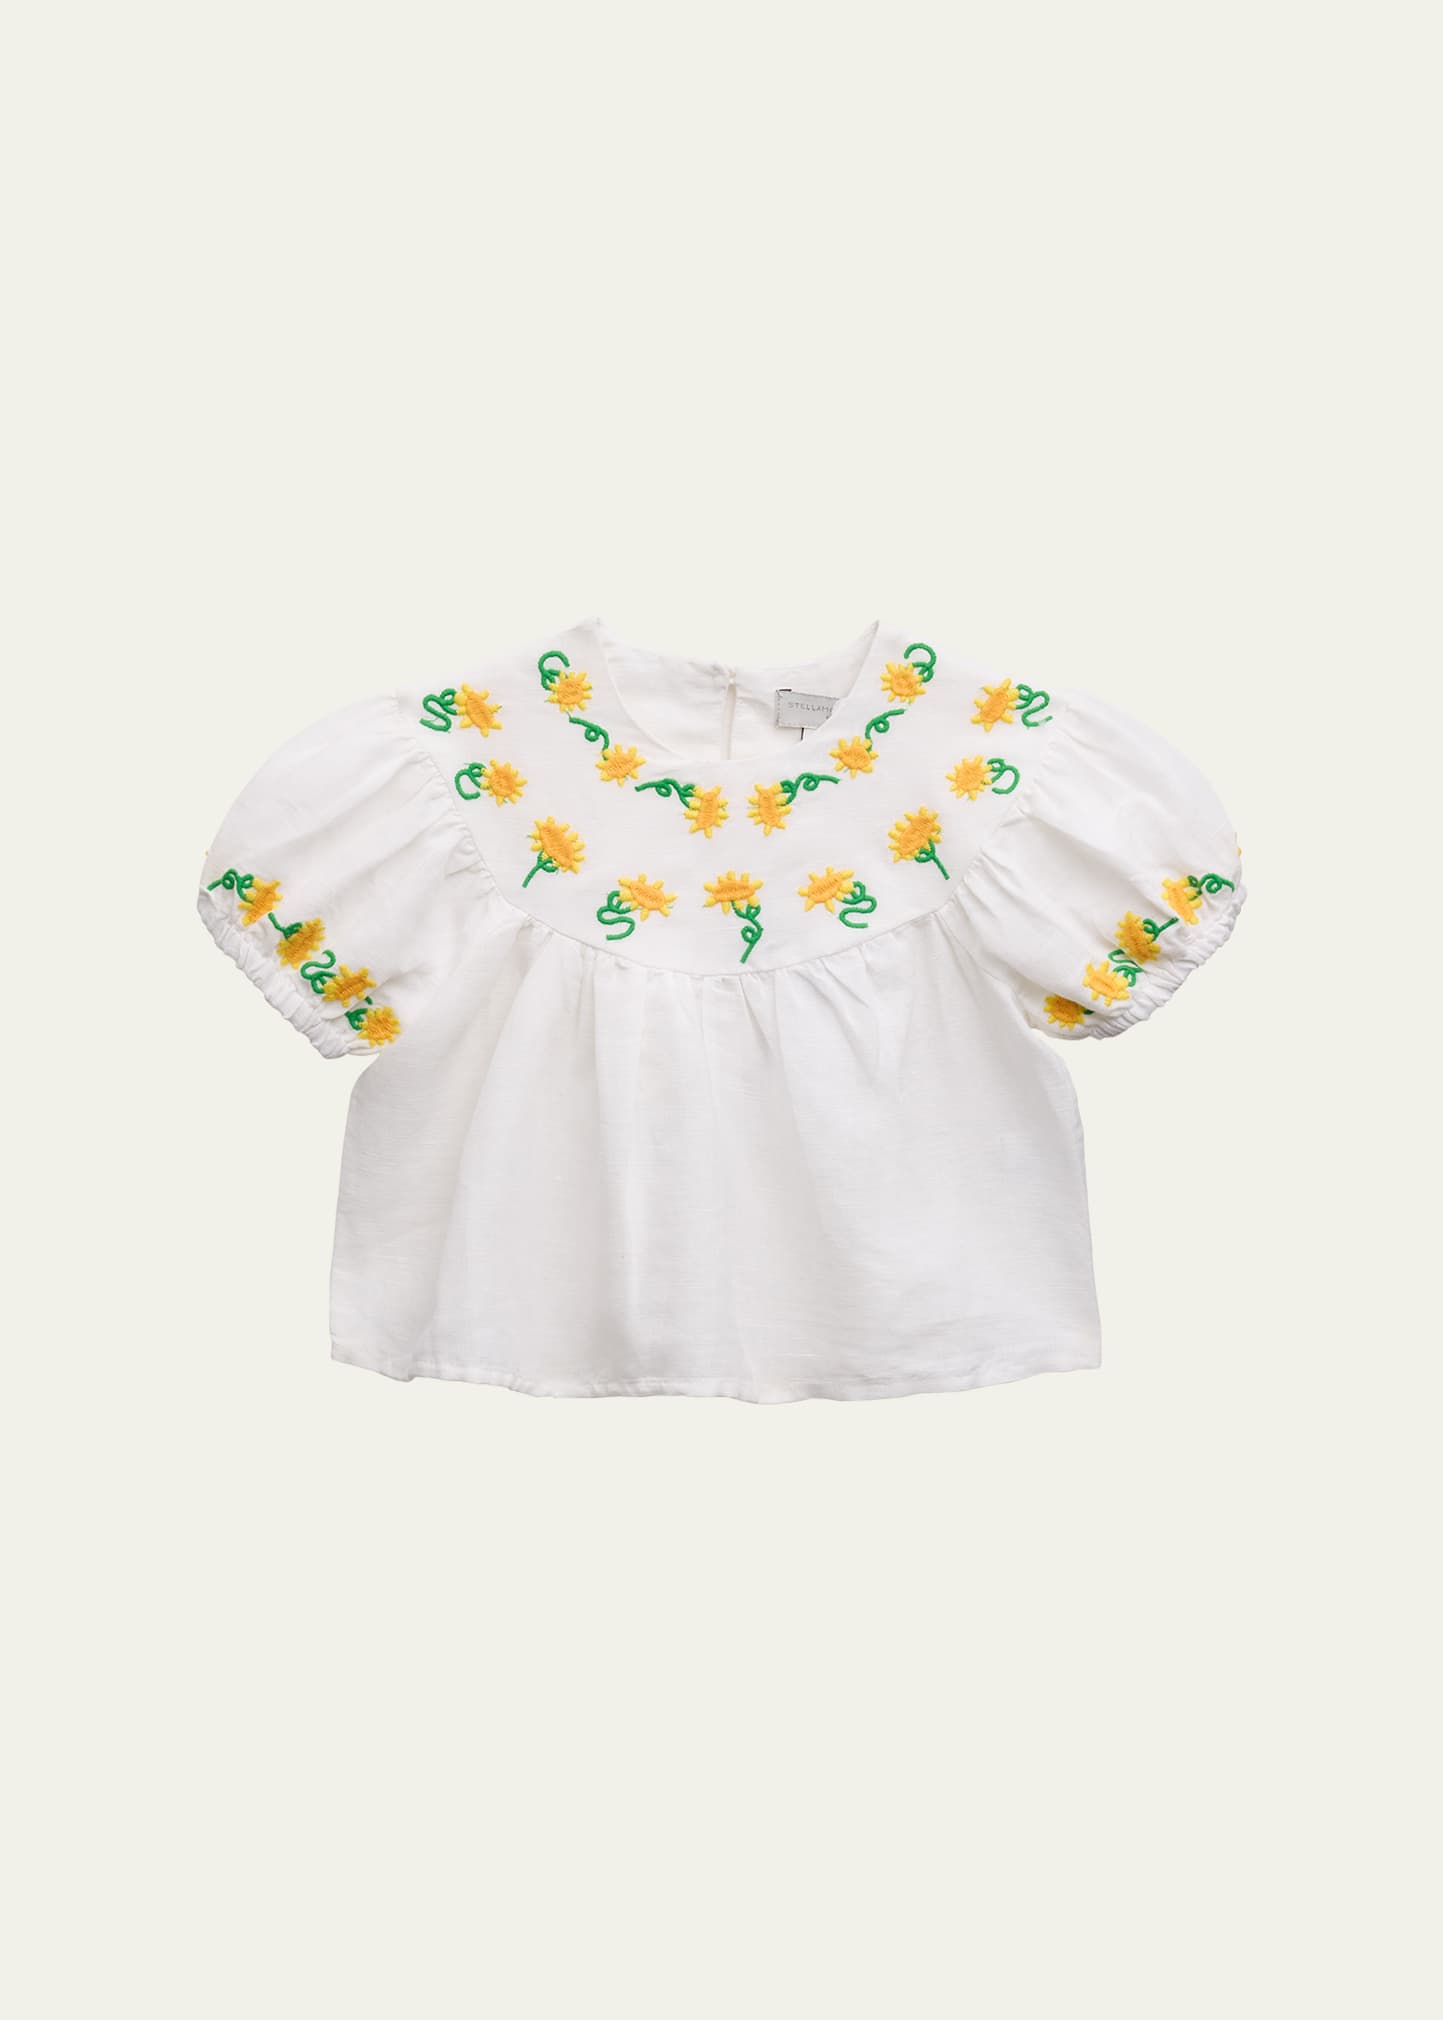 Girl's Linen Shirt with Sunflower Embroidery, Size 2-14